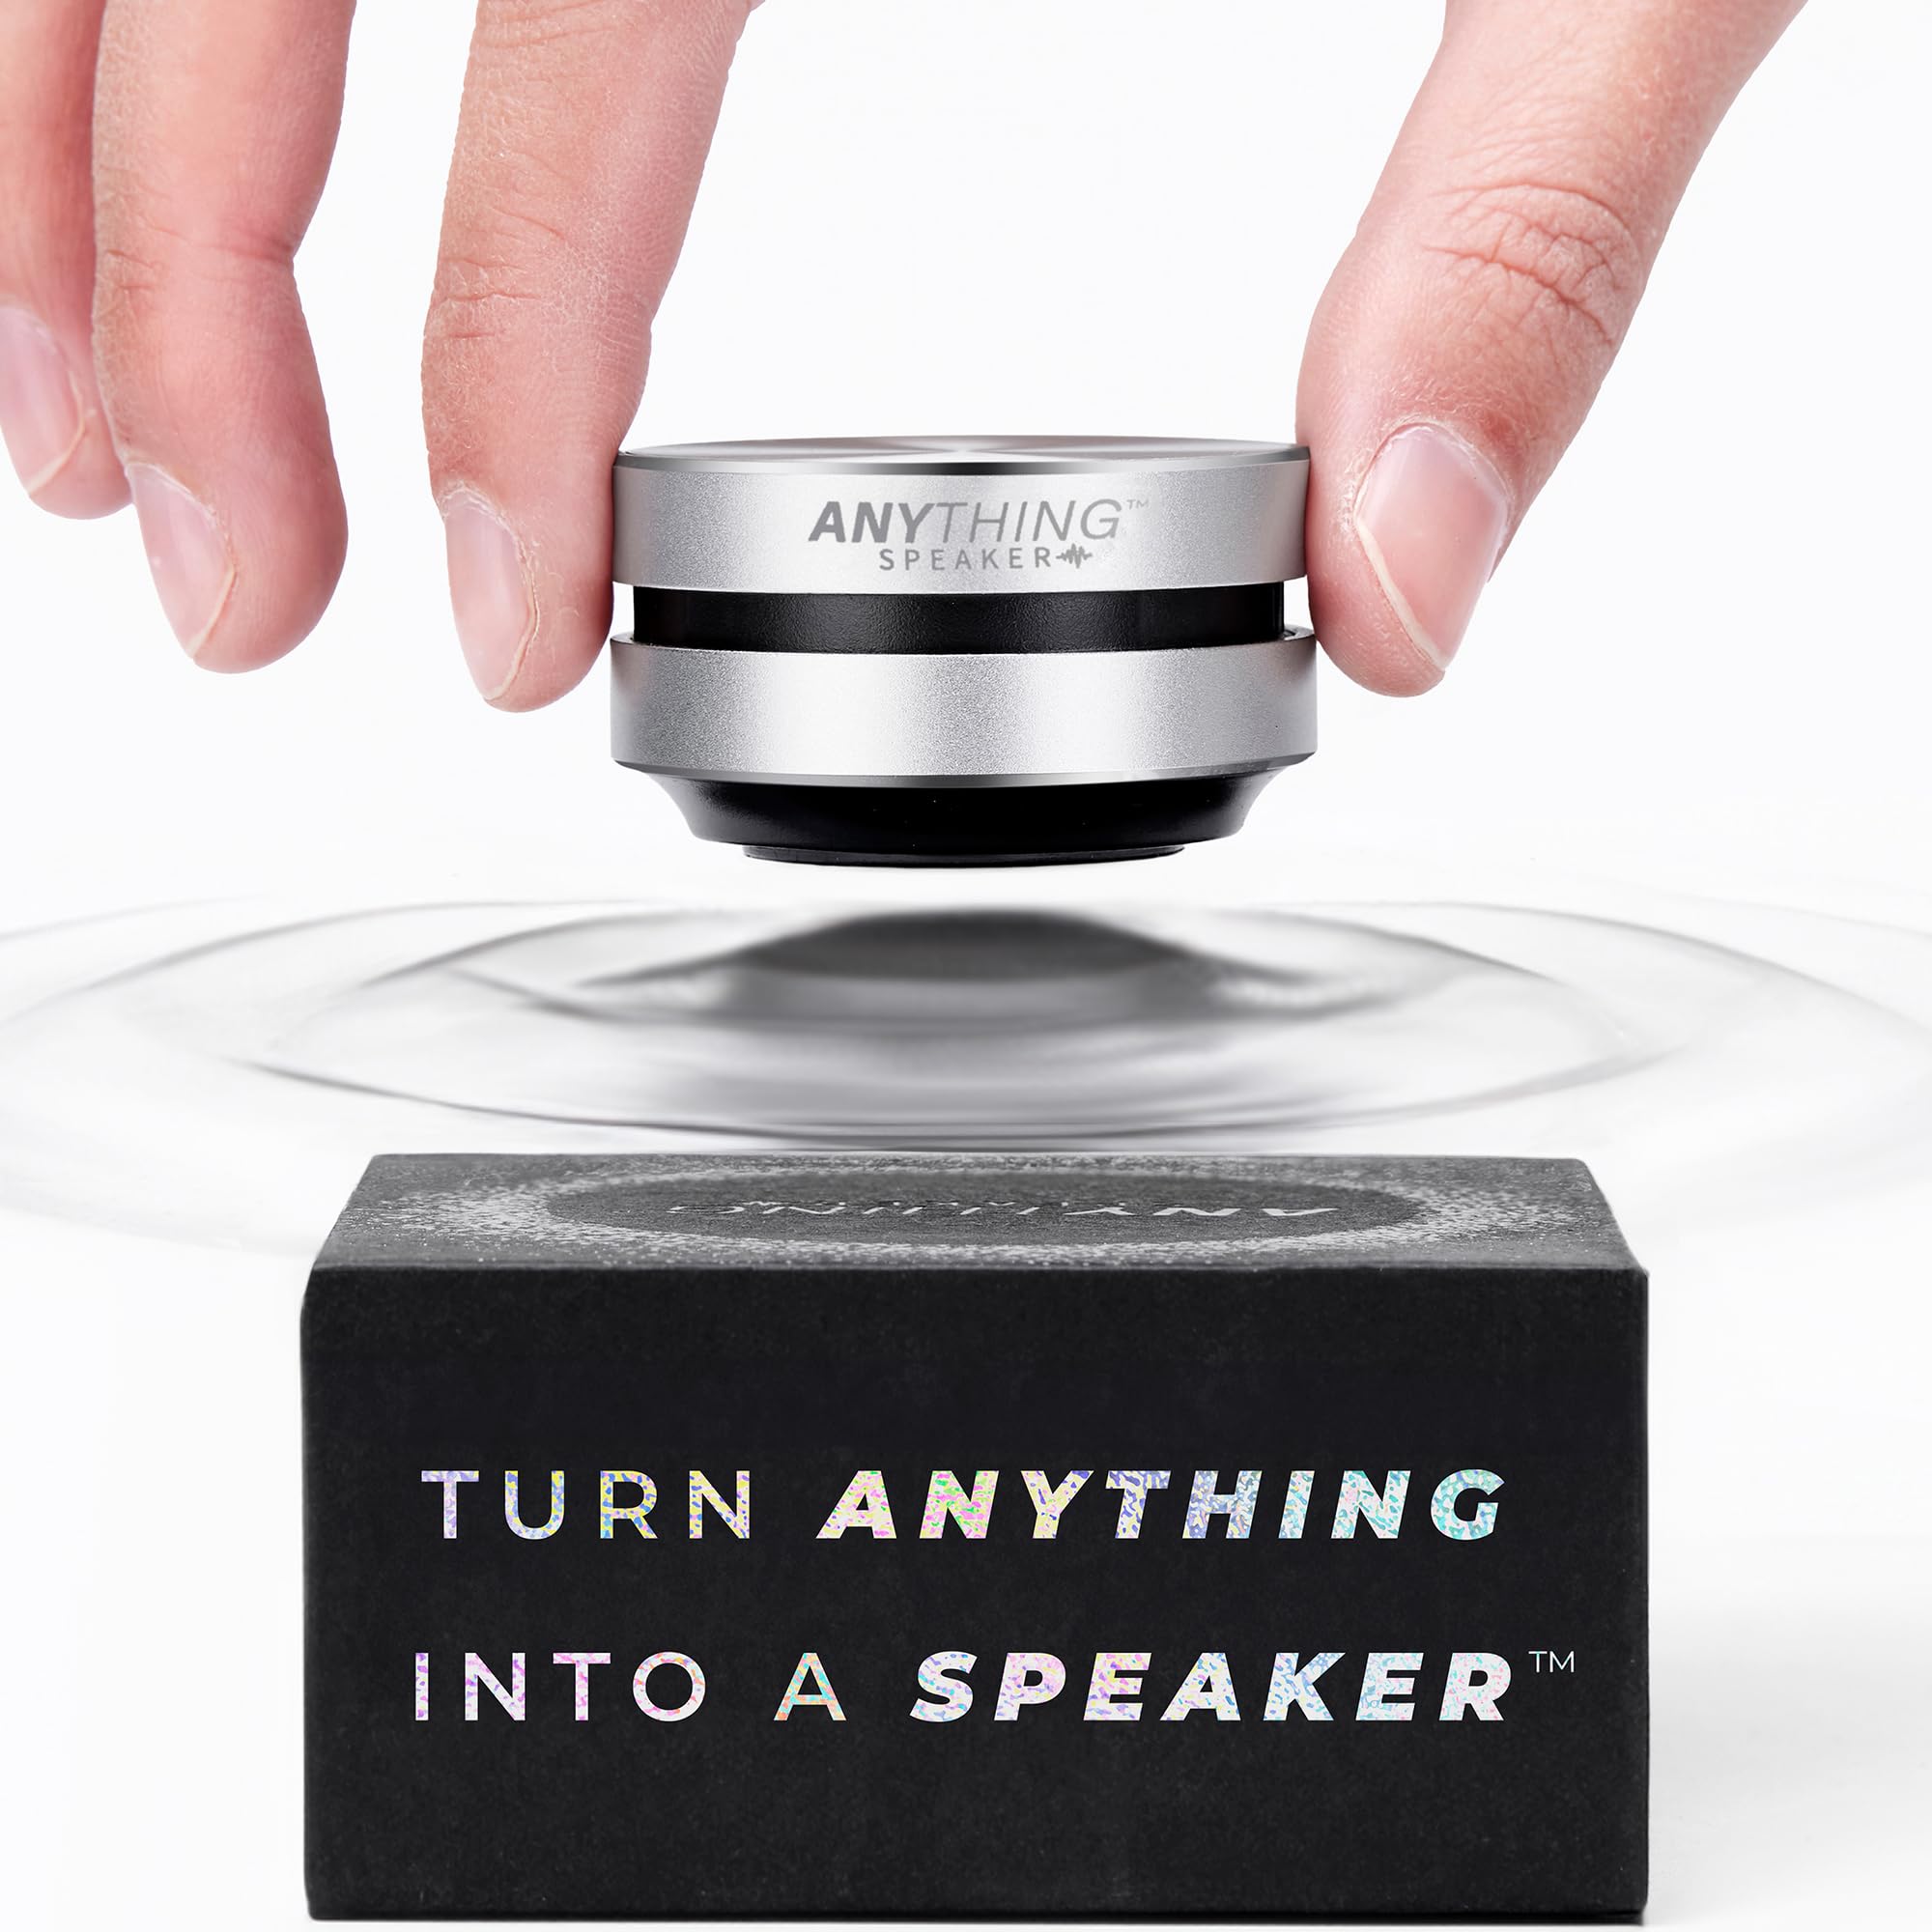 Portable device turns anything into a speaker